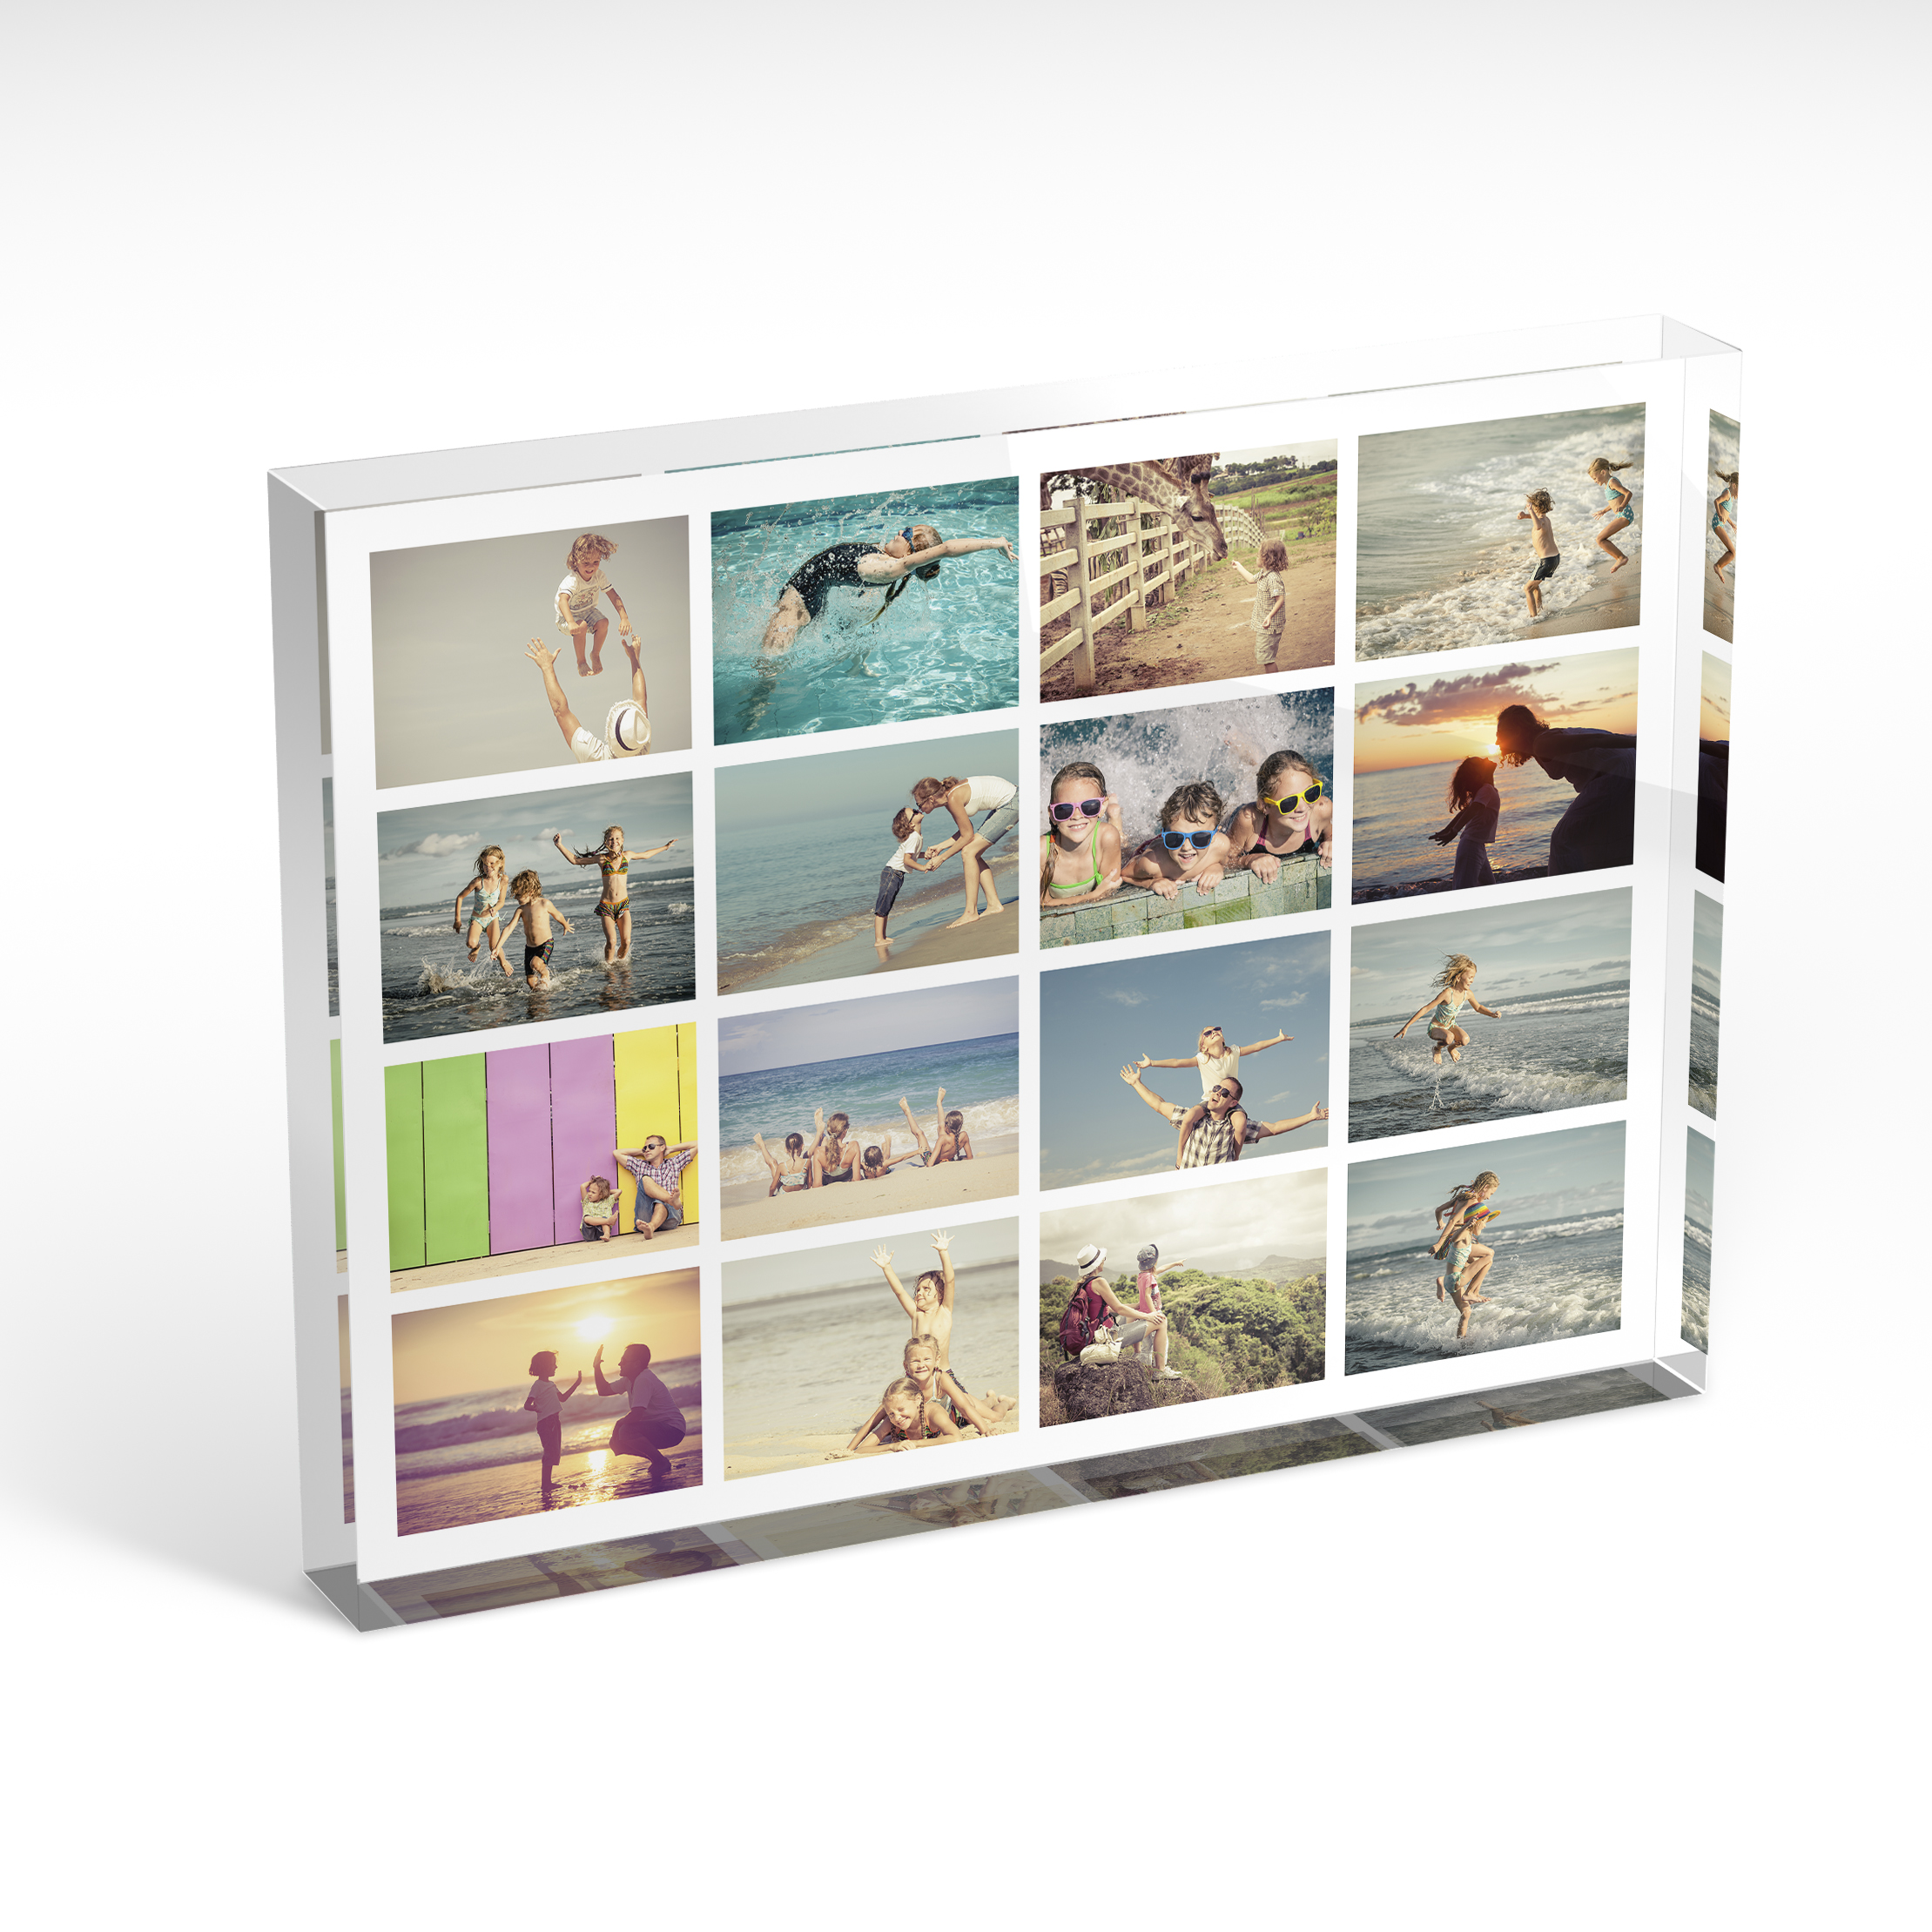 An angled side view of a landscape layout Perspex Photo Blocks with space for 10+ photos. Thiis design is named "Jumble". 